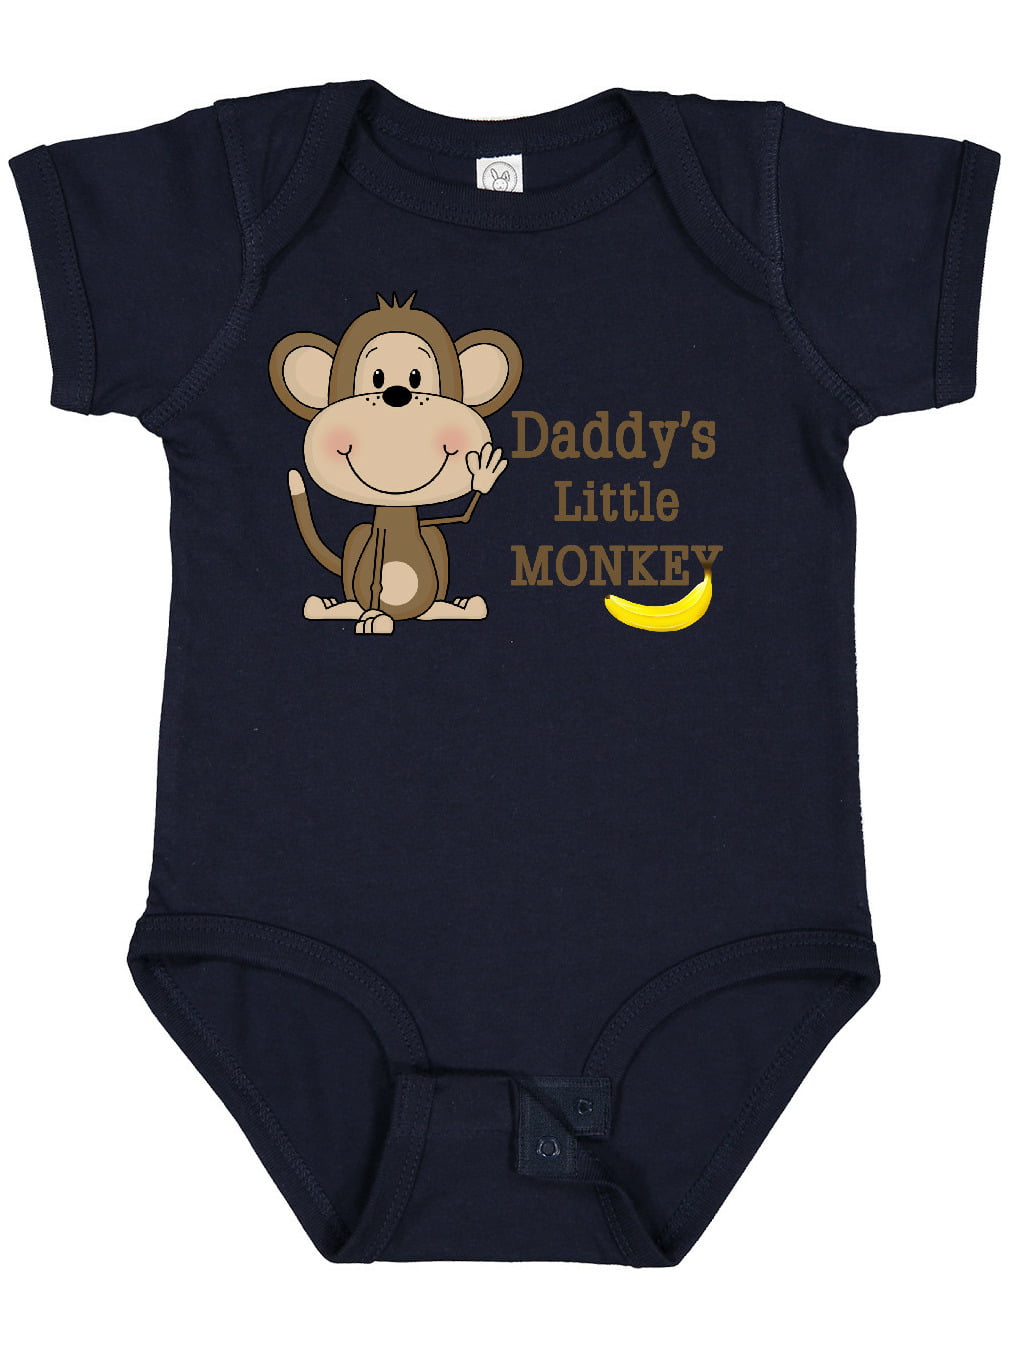 Baby Shower Gift Ideas Monkey Onesies Monkey Cute Baby Clothes Short/Long Sleeve Baby Onesies Bananas For Daddy Cute Baby Clothes